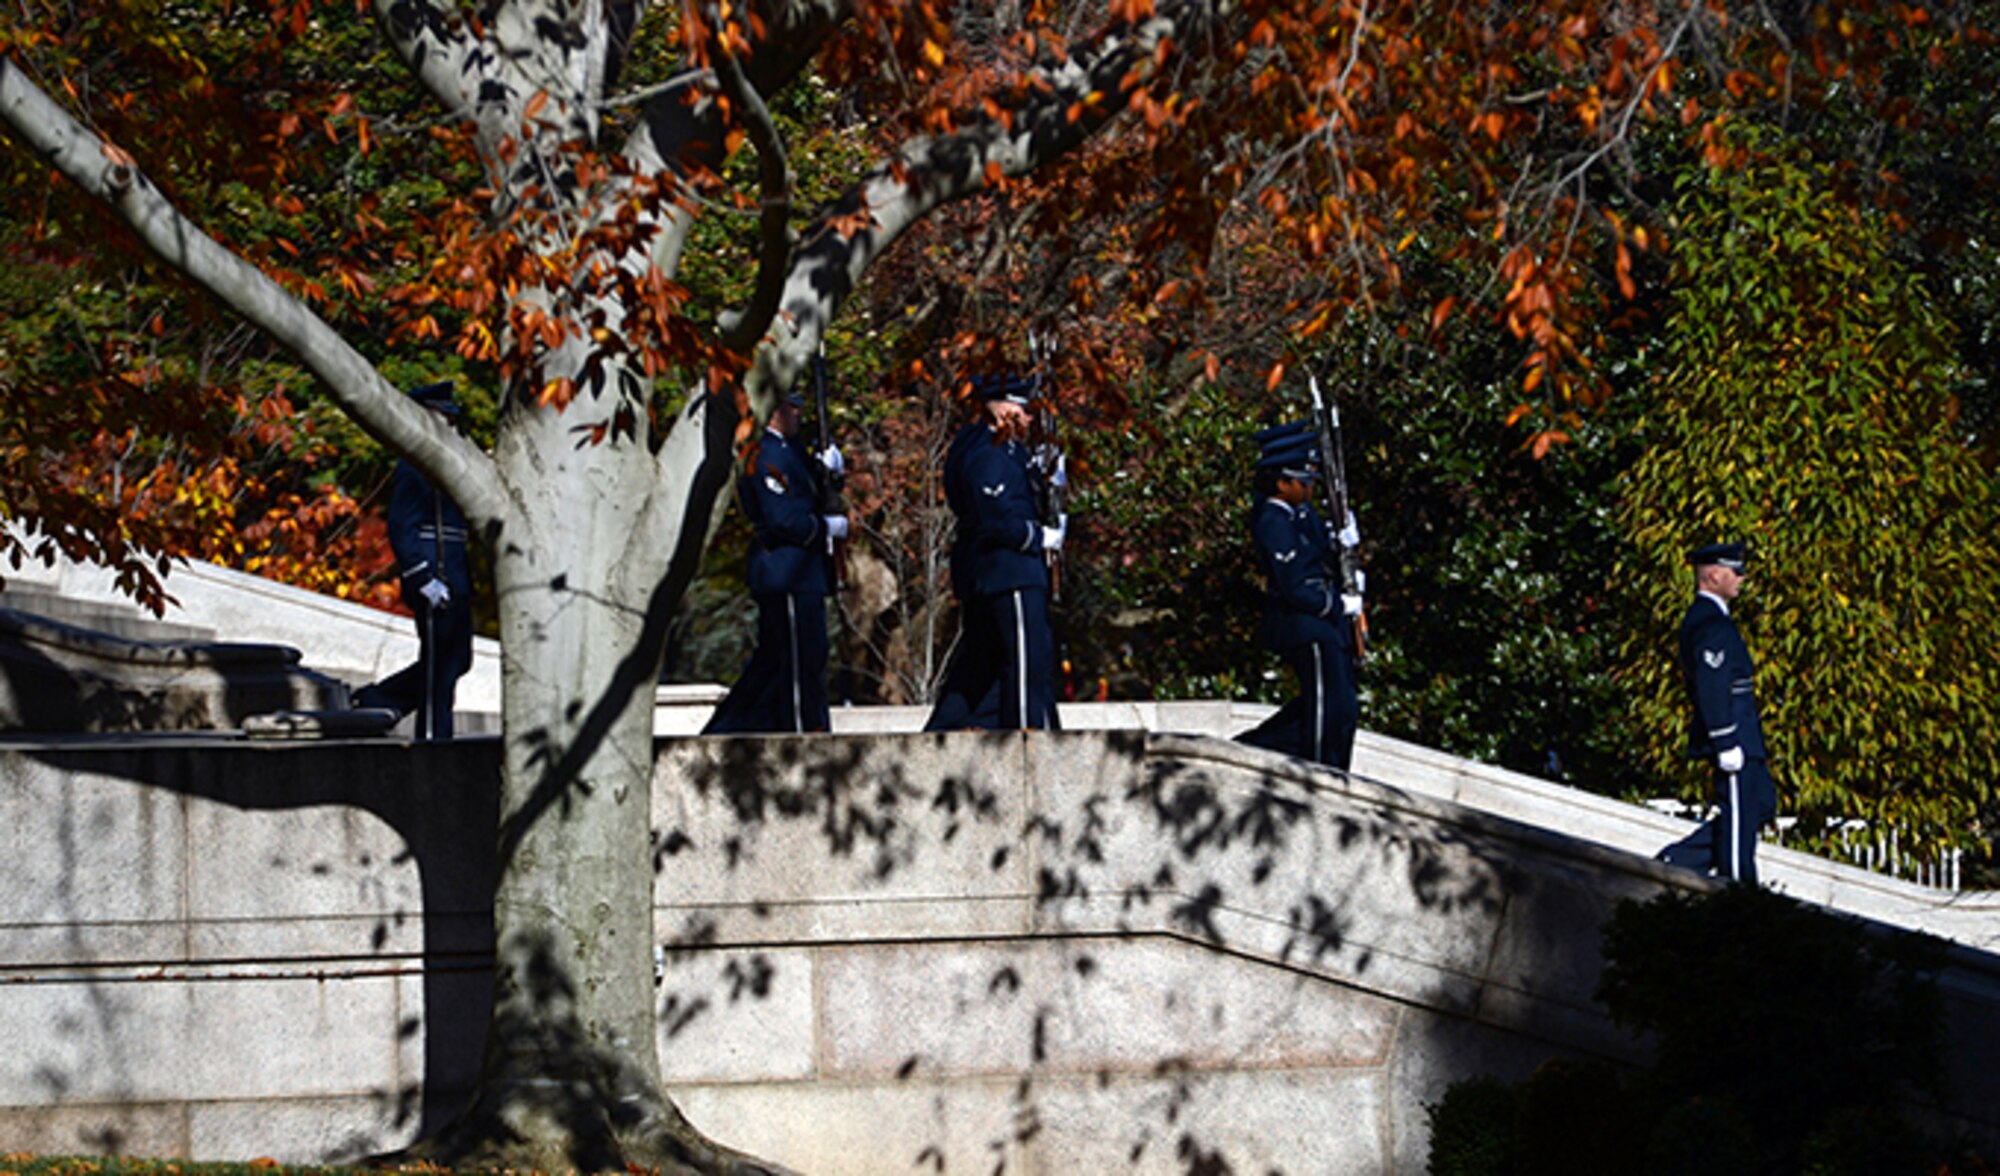 U.S. Air Force Honor Guard members march in formation during a wreath laying ceremony at the Tomb of the Unknown Soldier, Nov. 11, 2013 at Arlington National Cemetery, Arlington, Va. President Barack Obama joined service members and veterans of all four branches in commemorating the sacrifices of military members past and present during this year's Veterans Day. (Department of Defense photo/EJ Hersom)